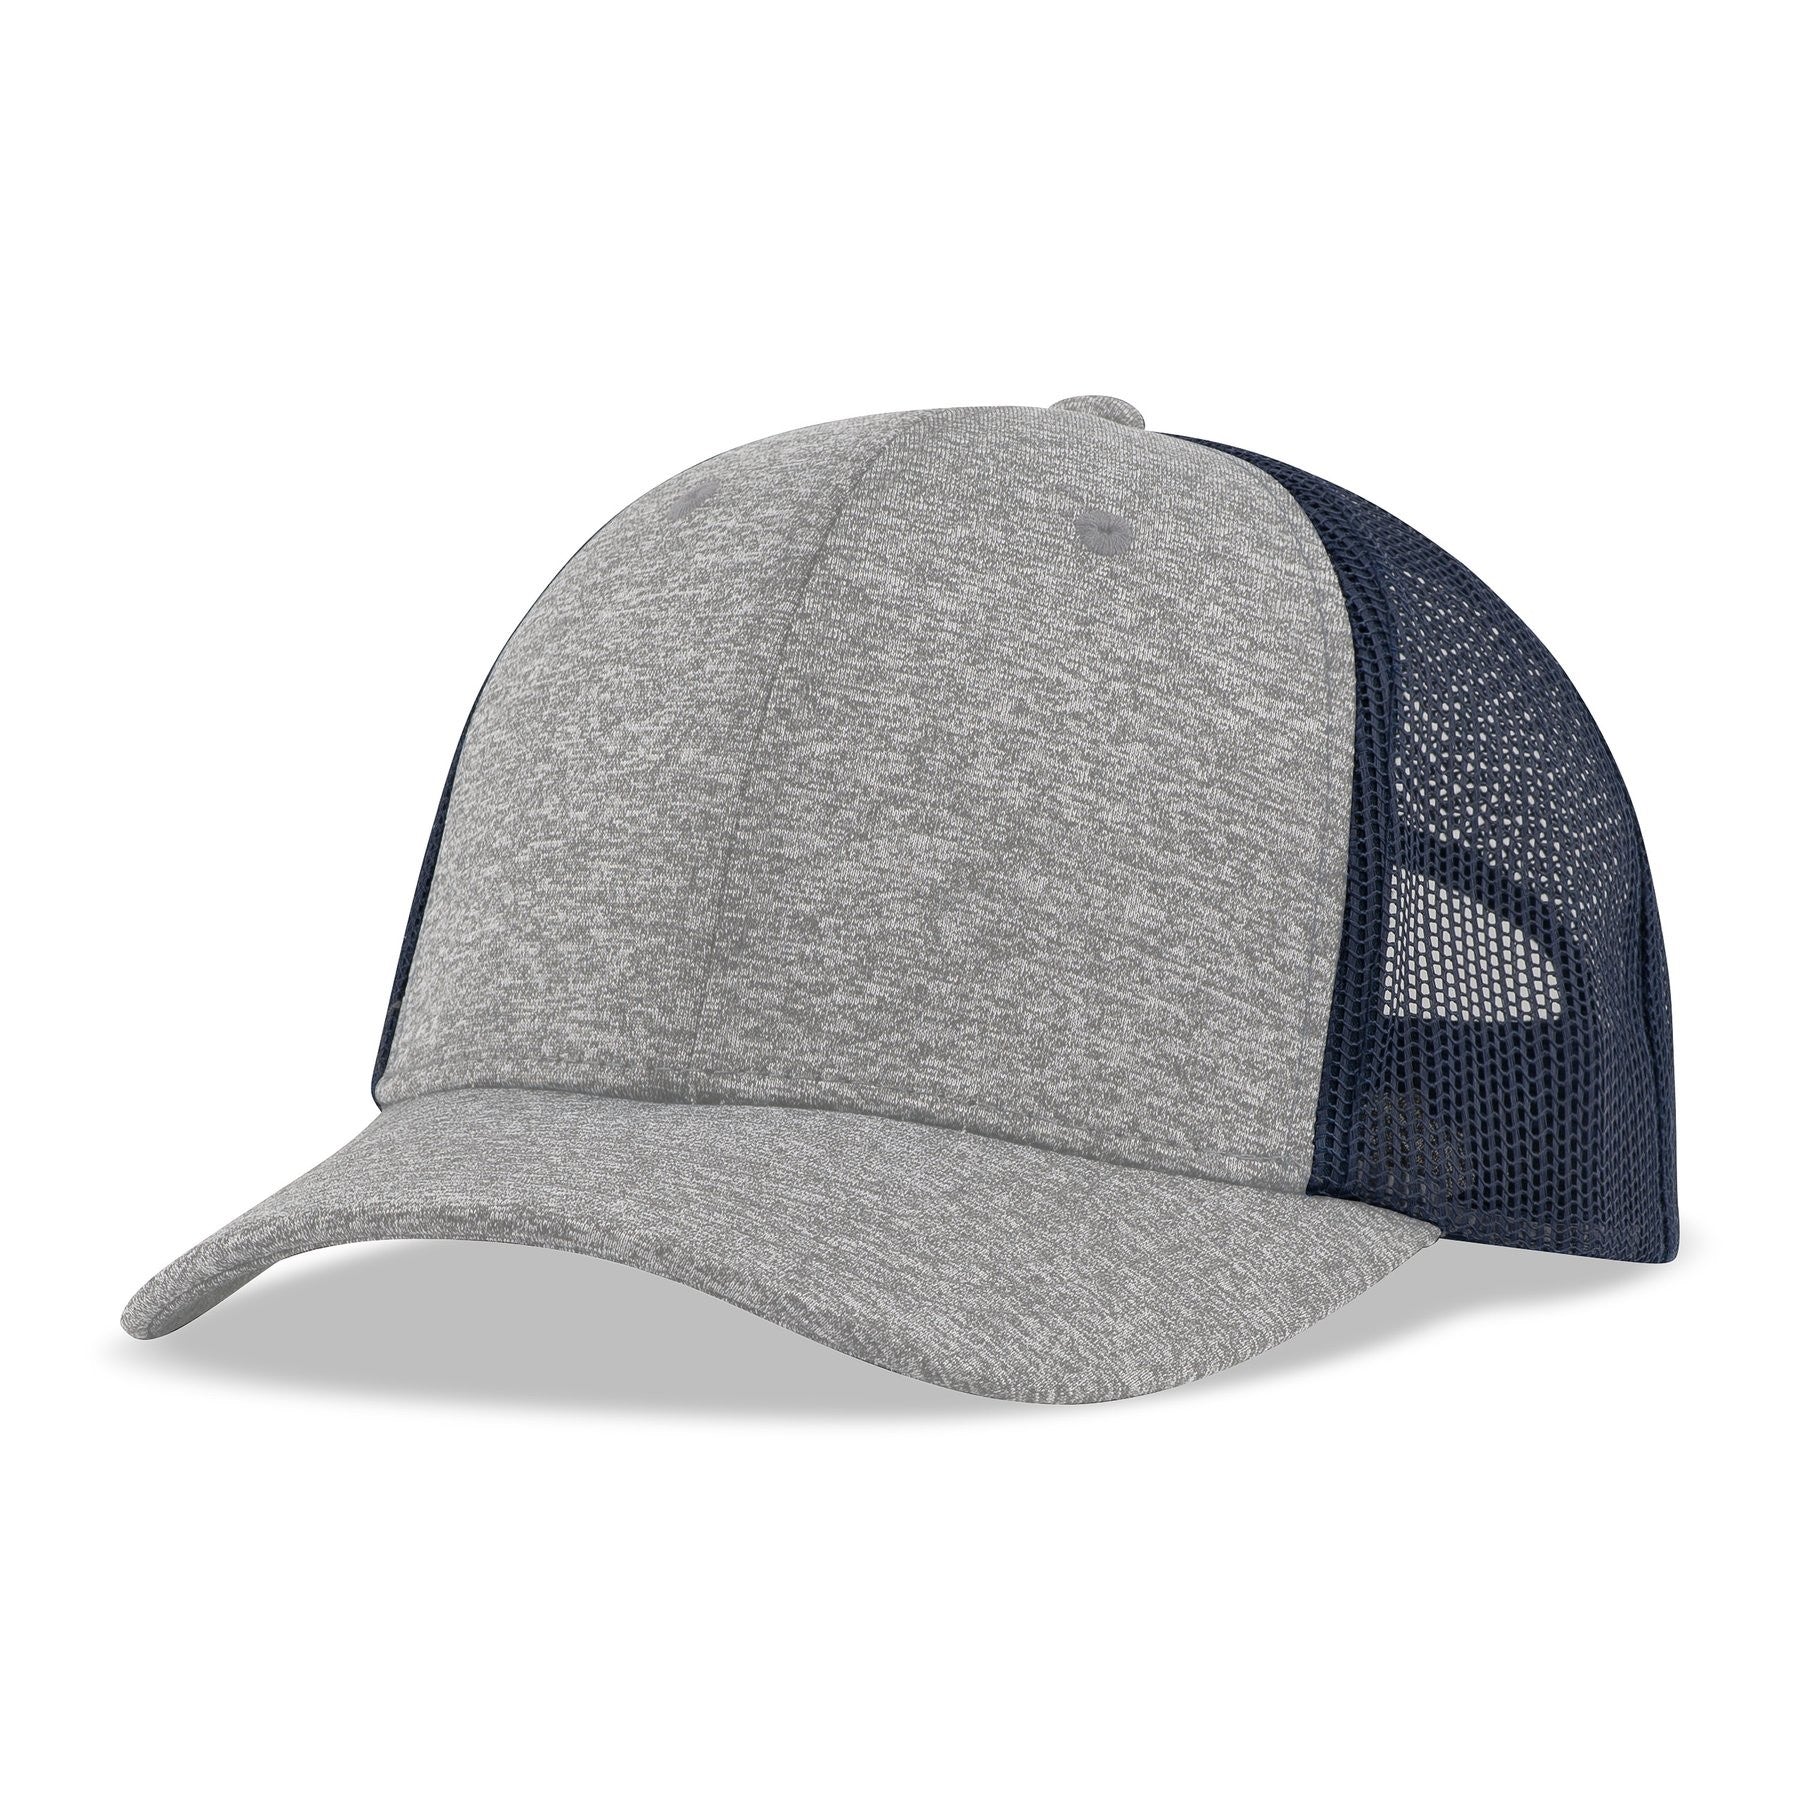 8964 Jersey Constructed Mesh Cap - Budget Promotion